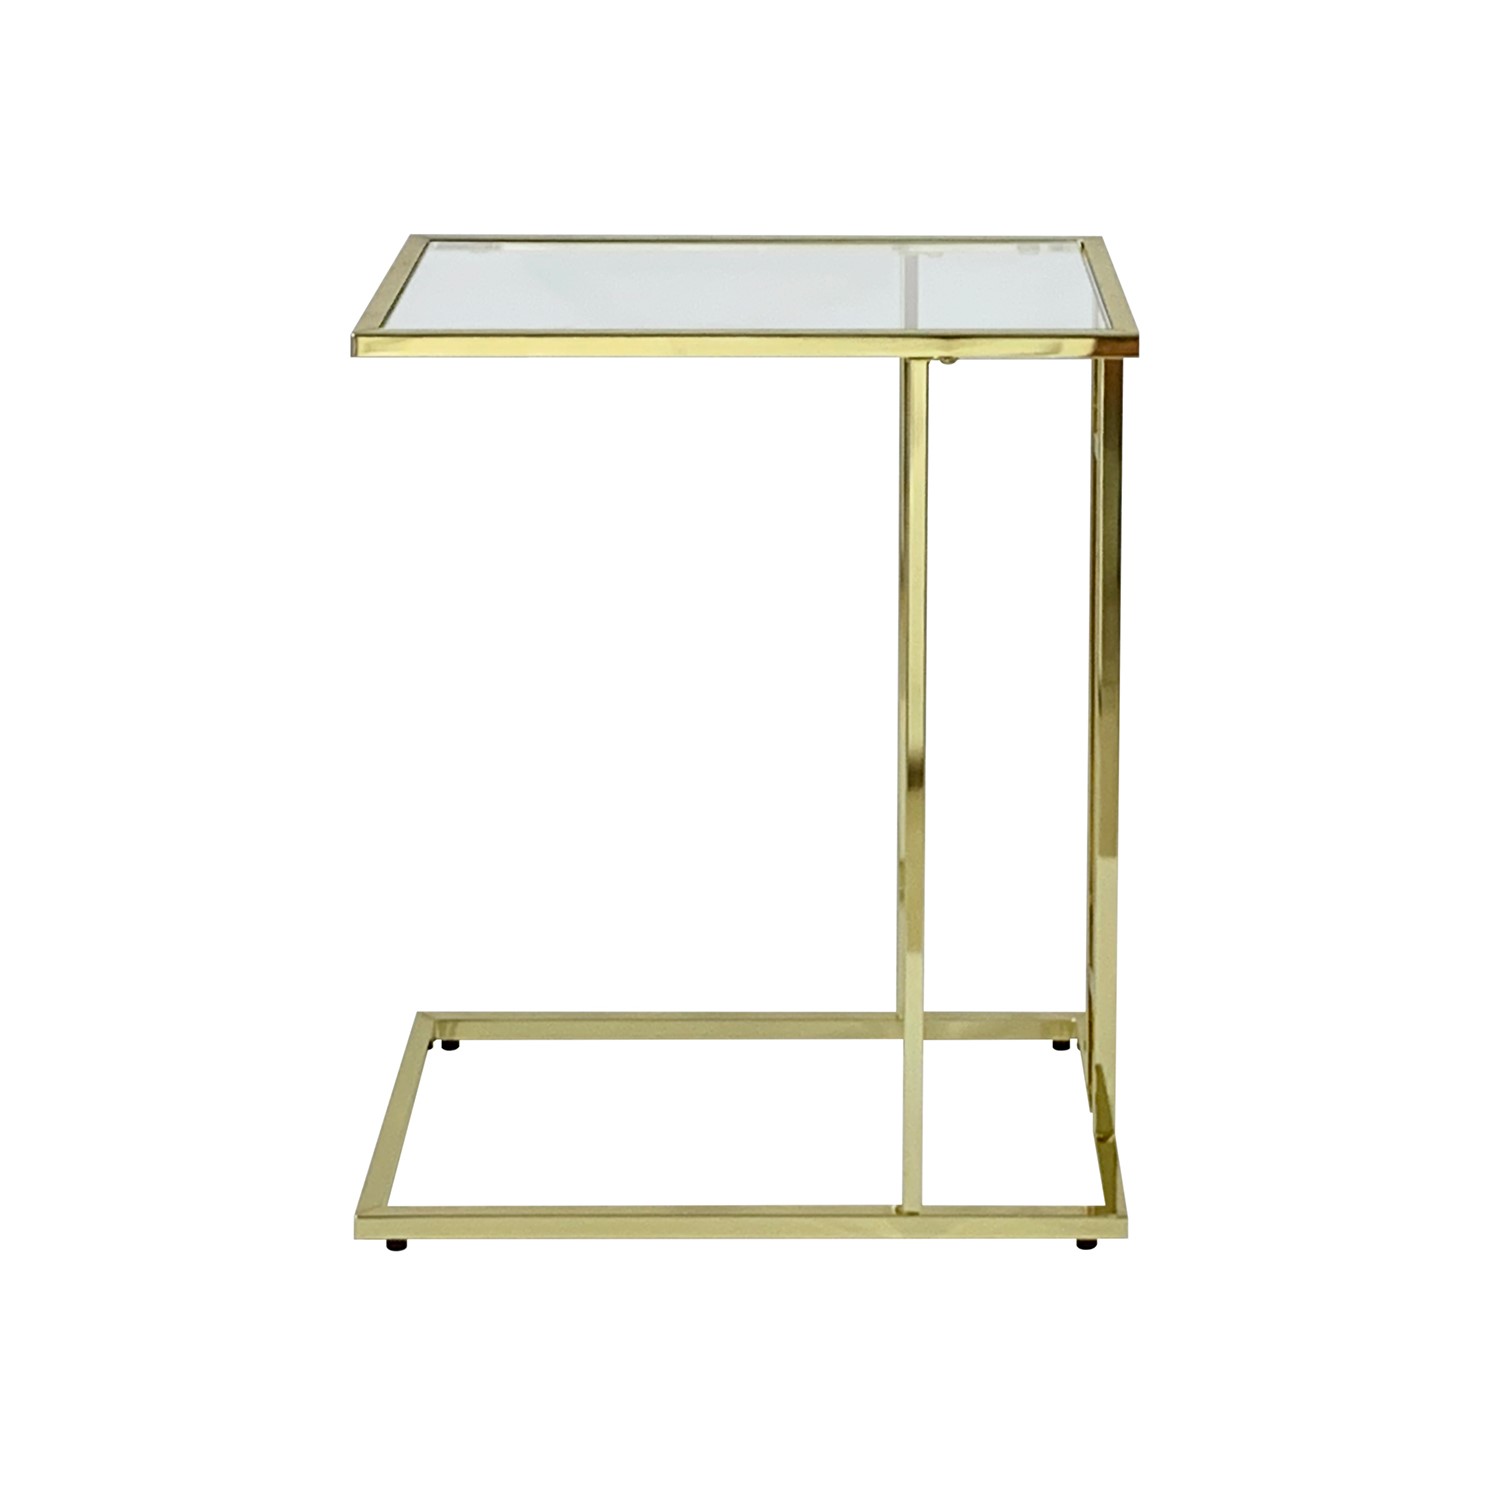 Photo of Harry gold sofa table clear glass - dsp kd